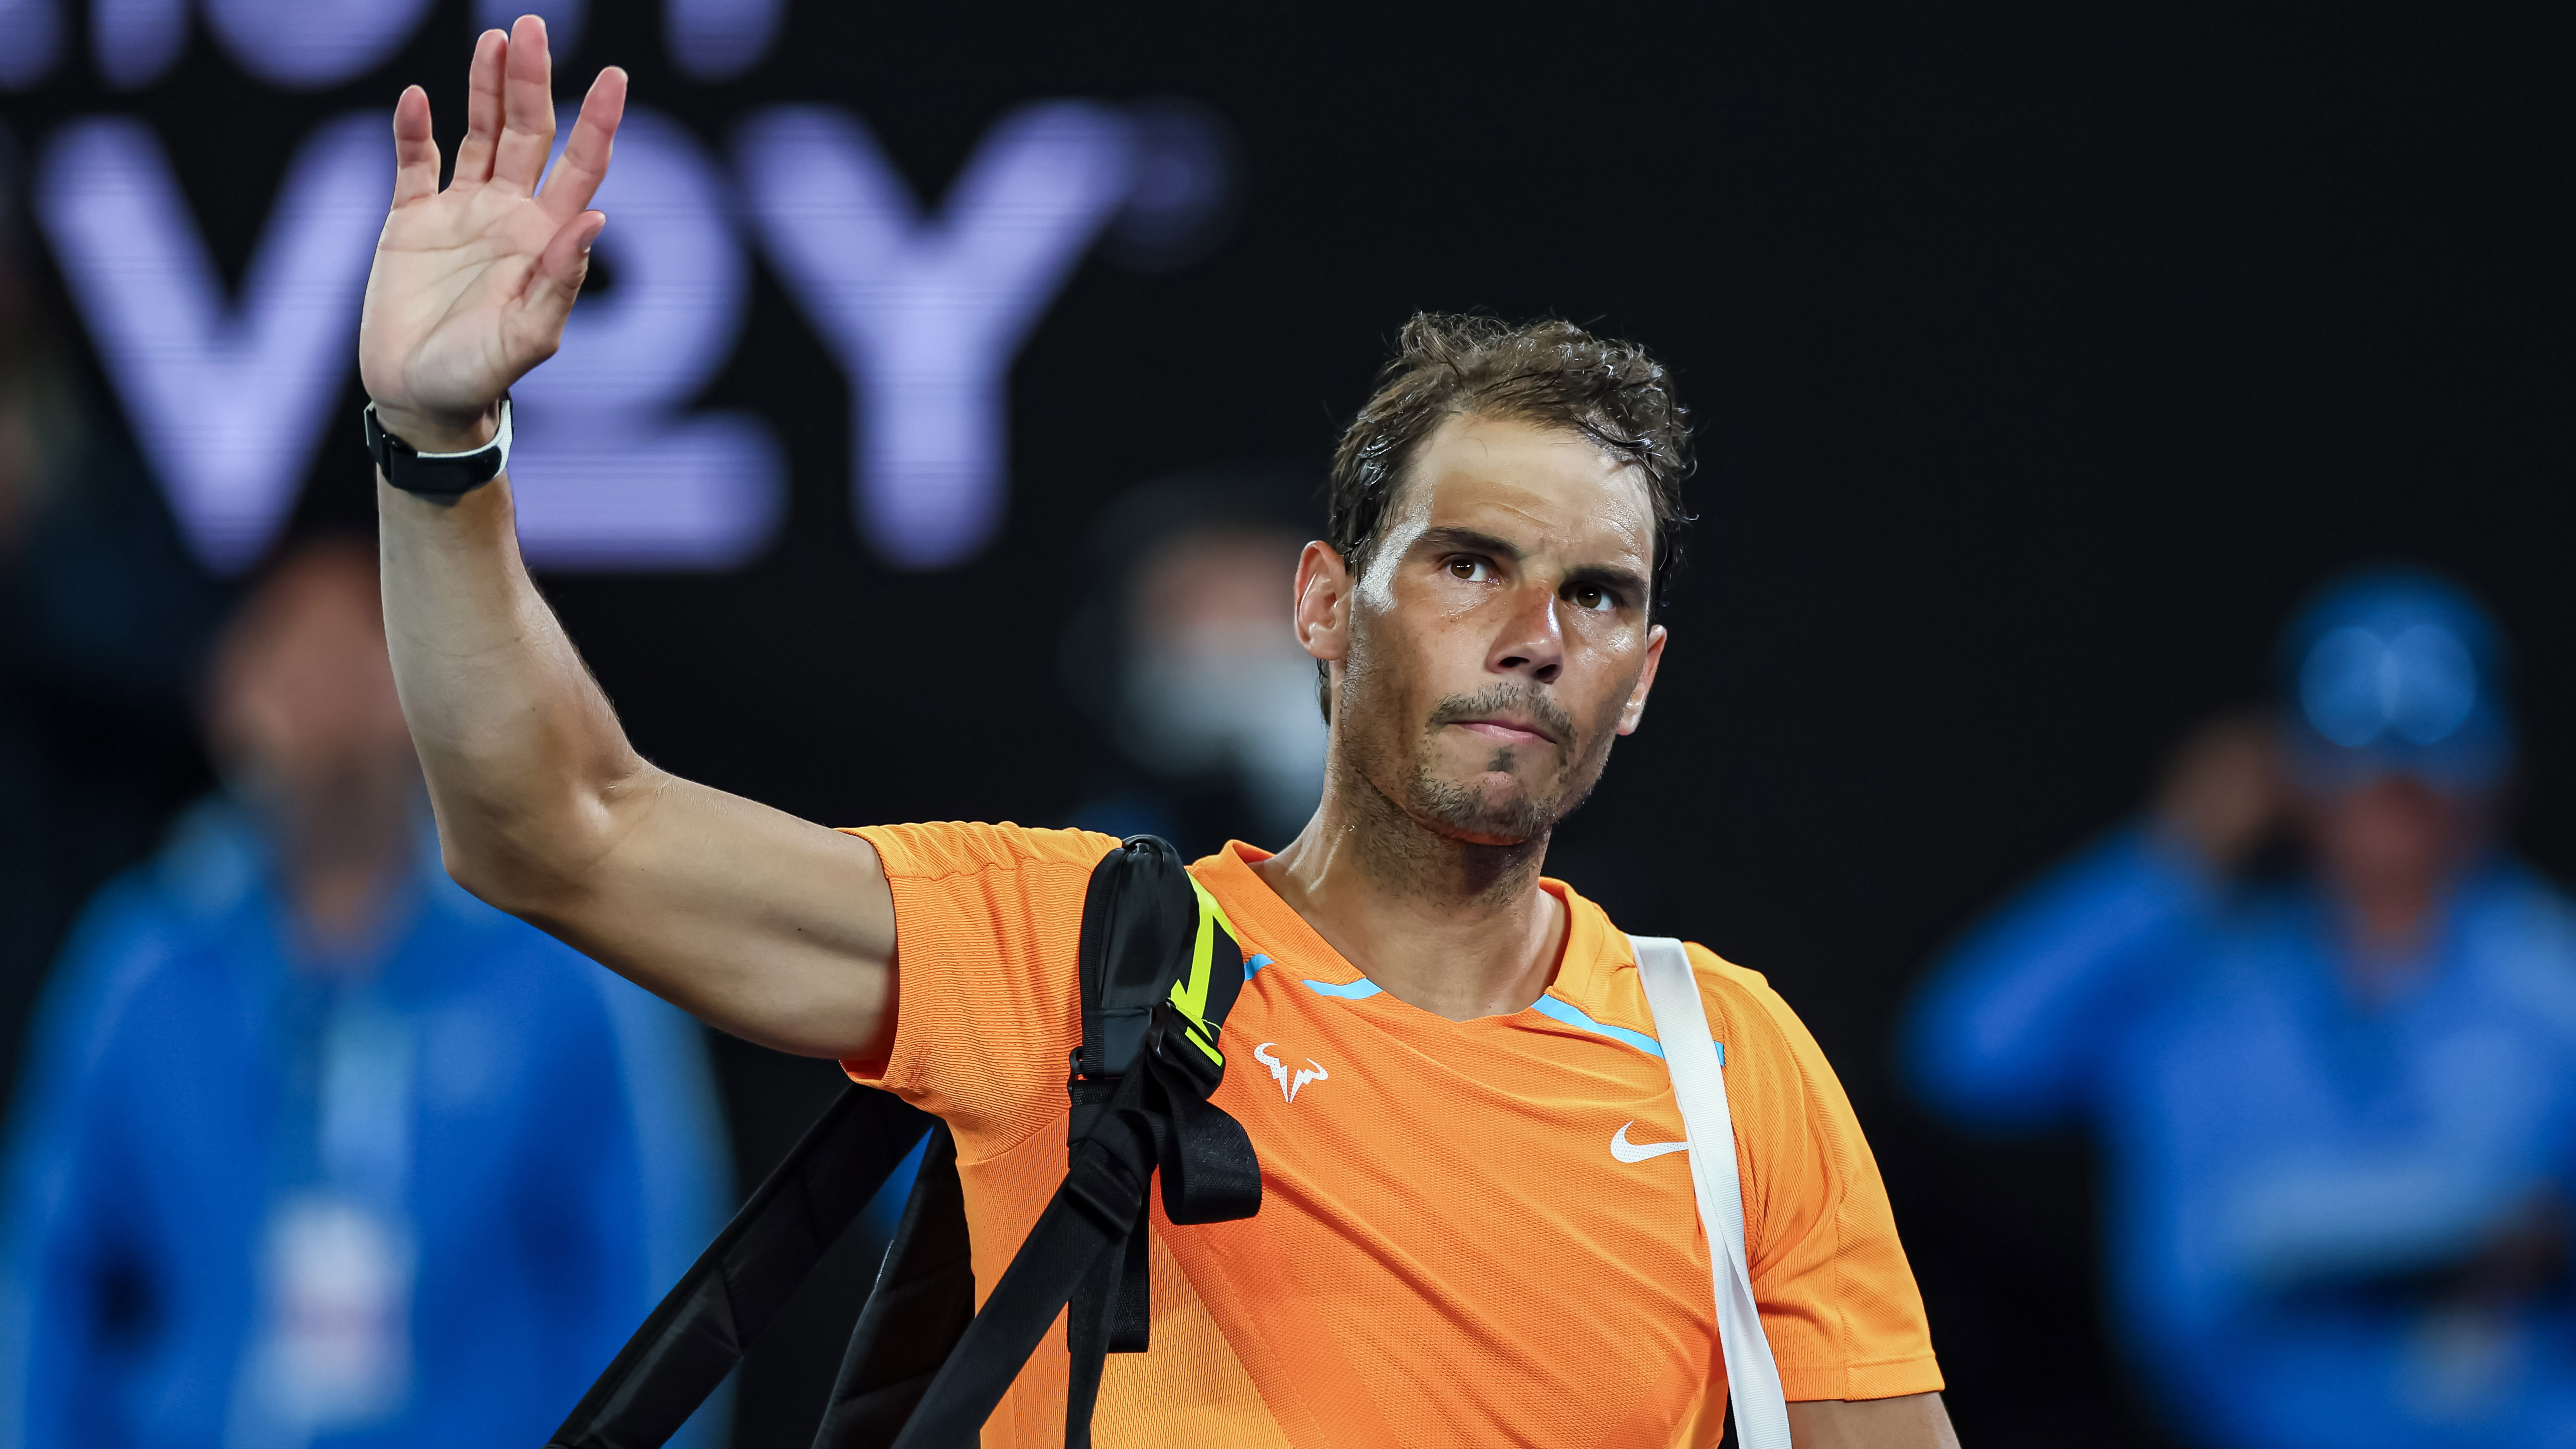 Rafael Nadal after his second round match on day three of the 2023 Australian Open.